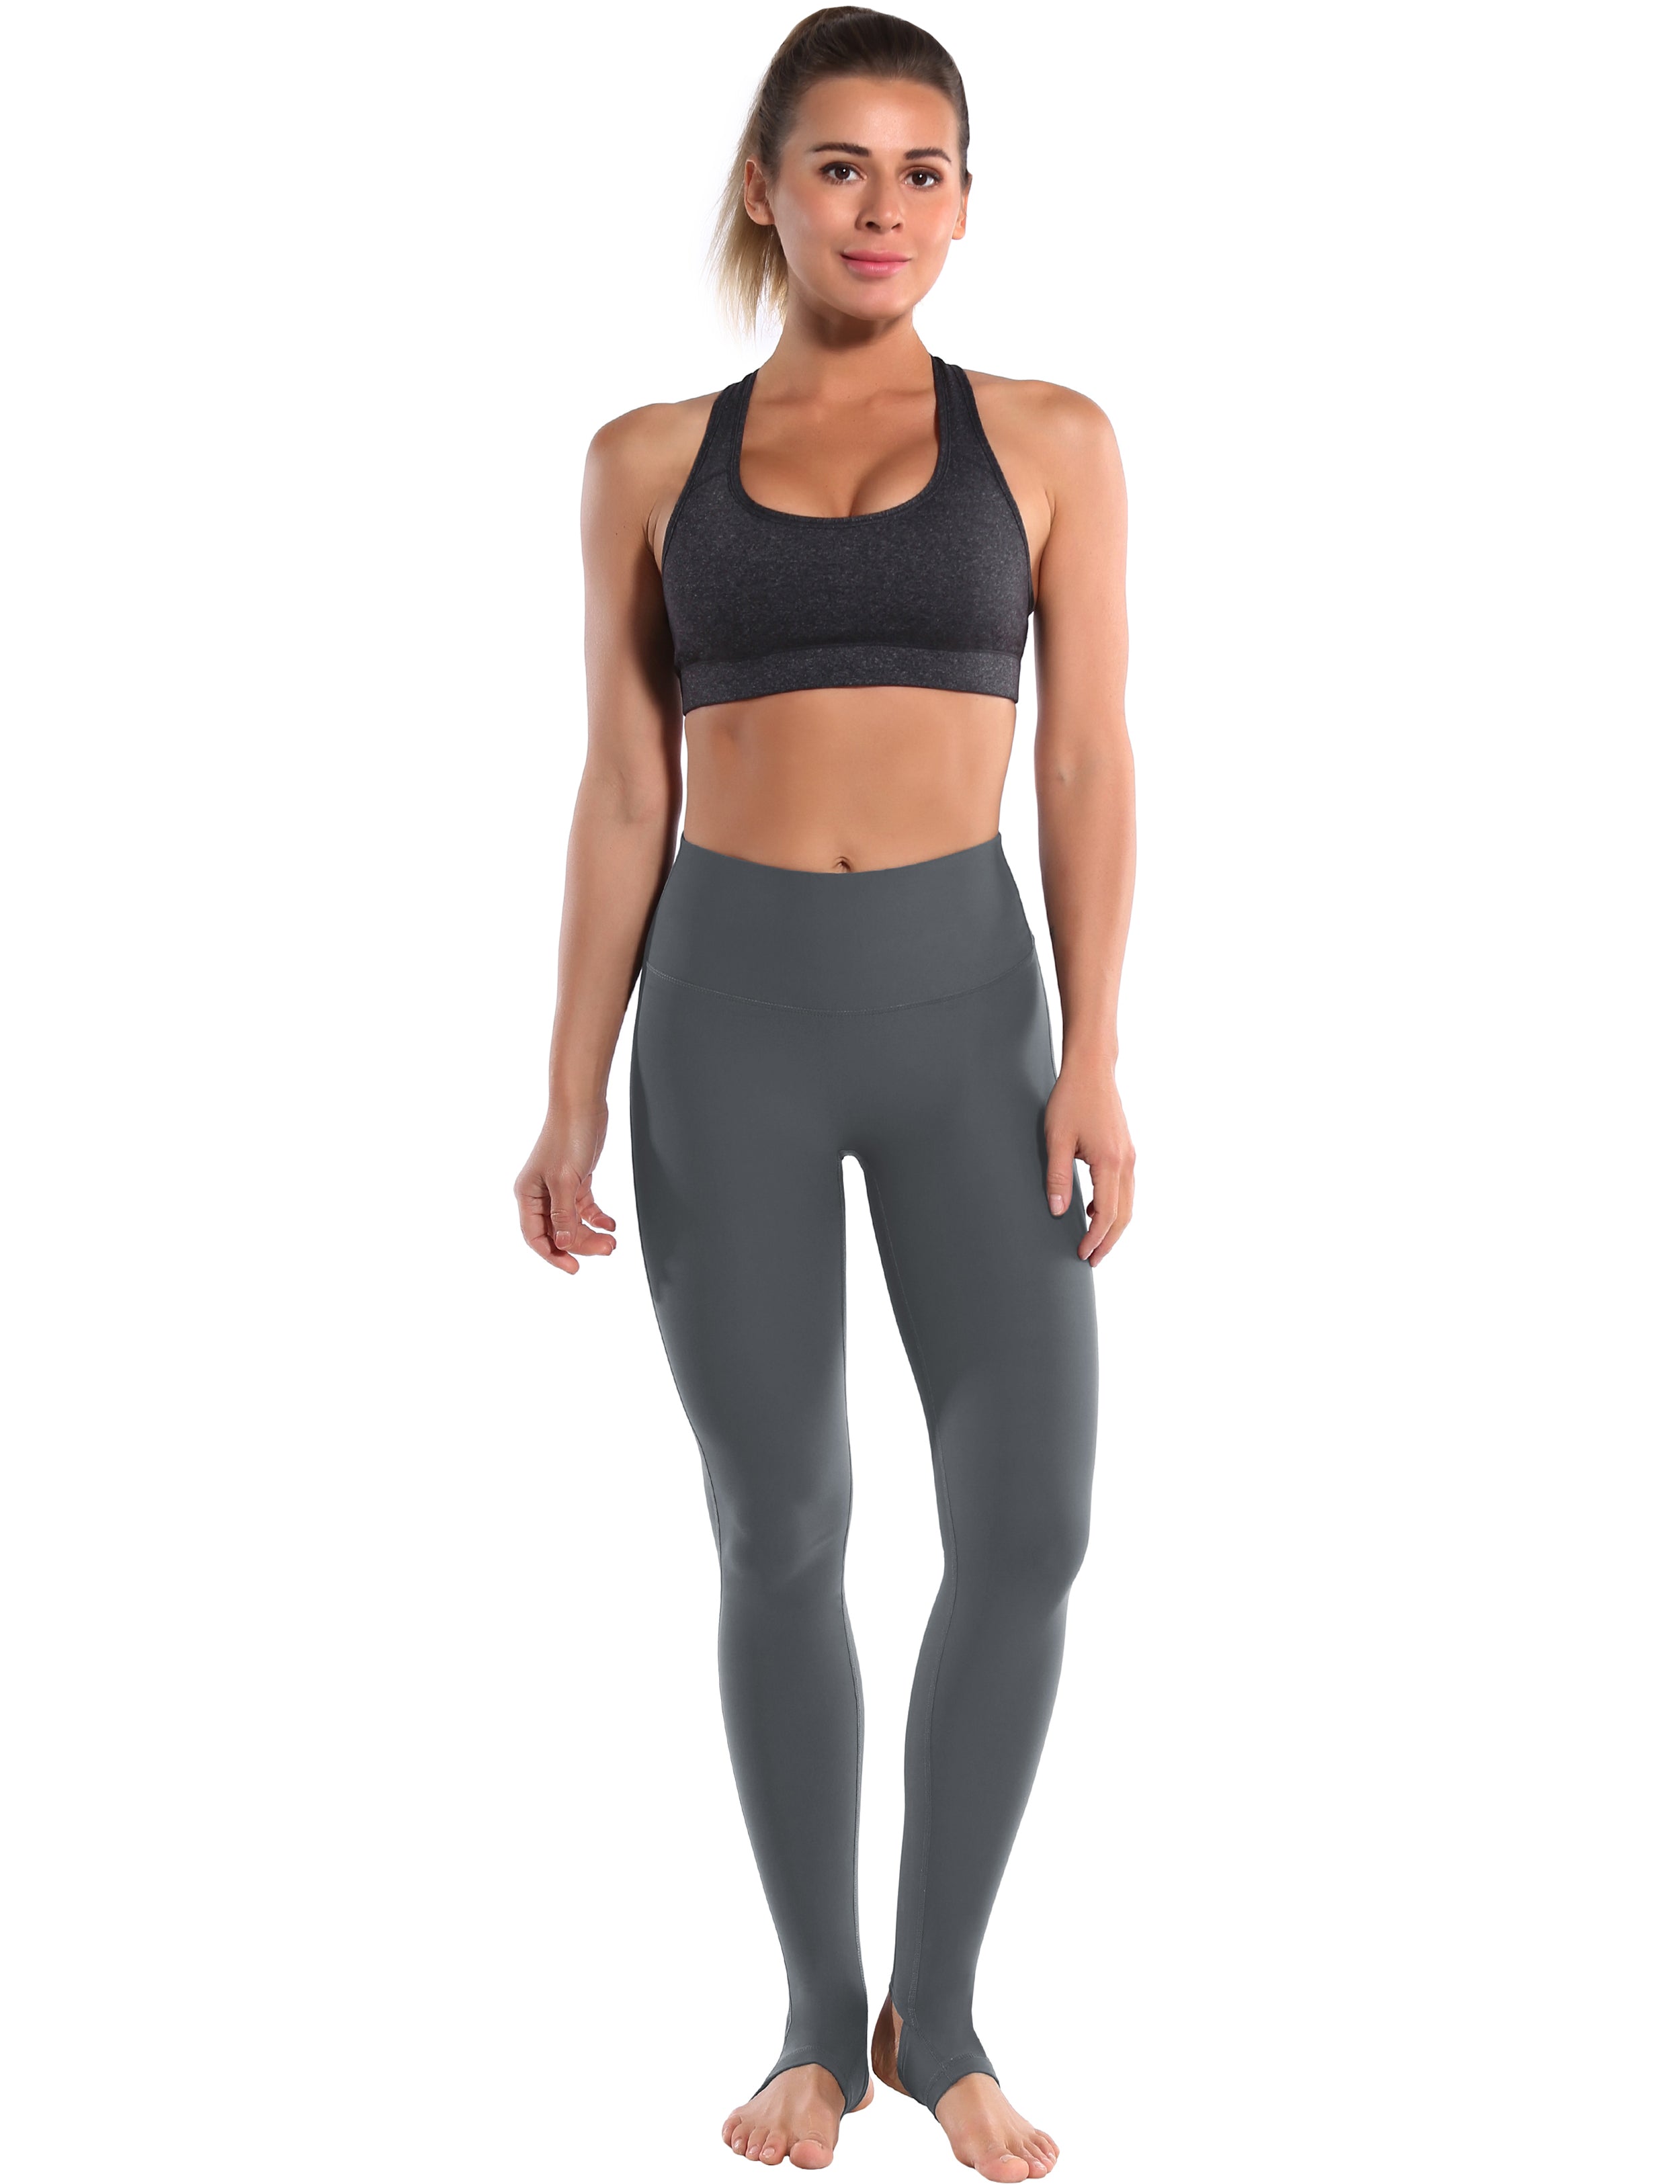 Over the Heel Pilates Pants shadowcharcoal Over the Heel Design 87%Nylon/13%Spandex Fabric doesn't attract lint easily 4-way stretch No see-through Moisture-wicking Tummy control